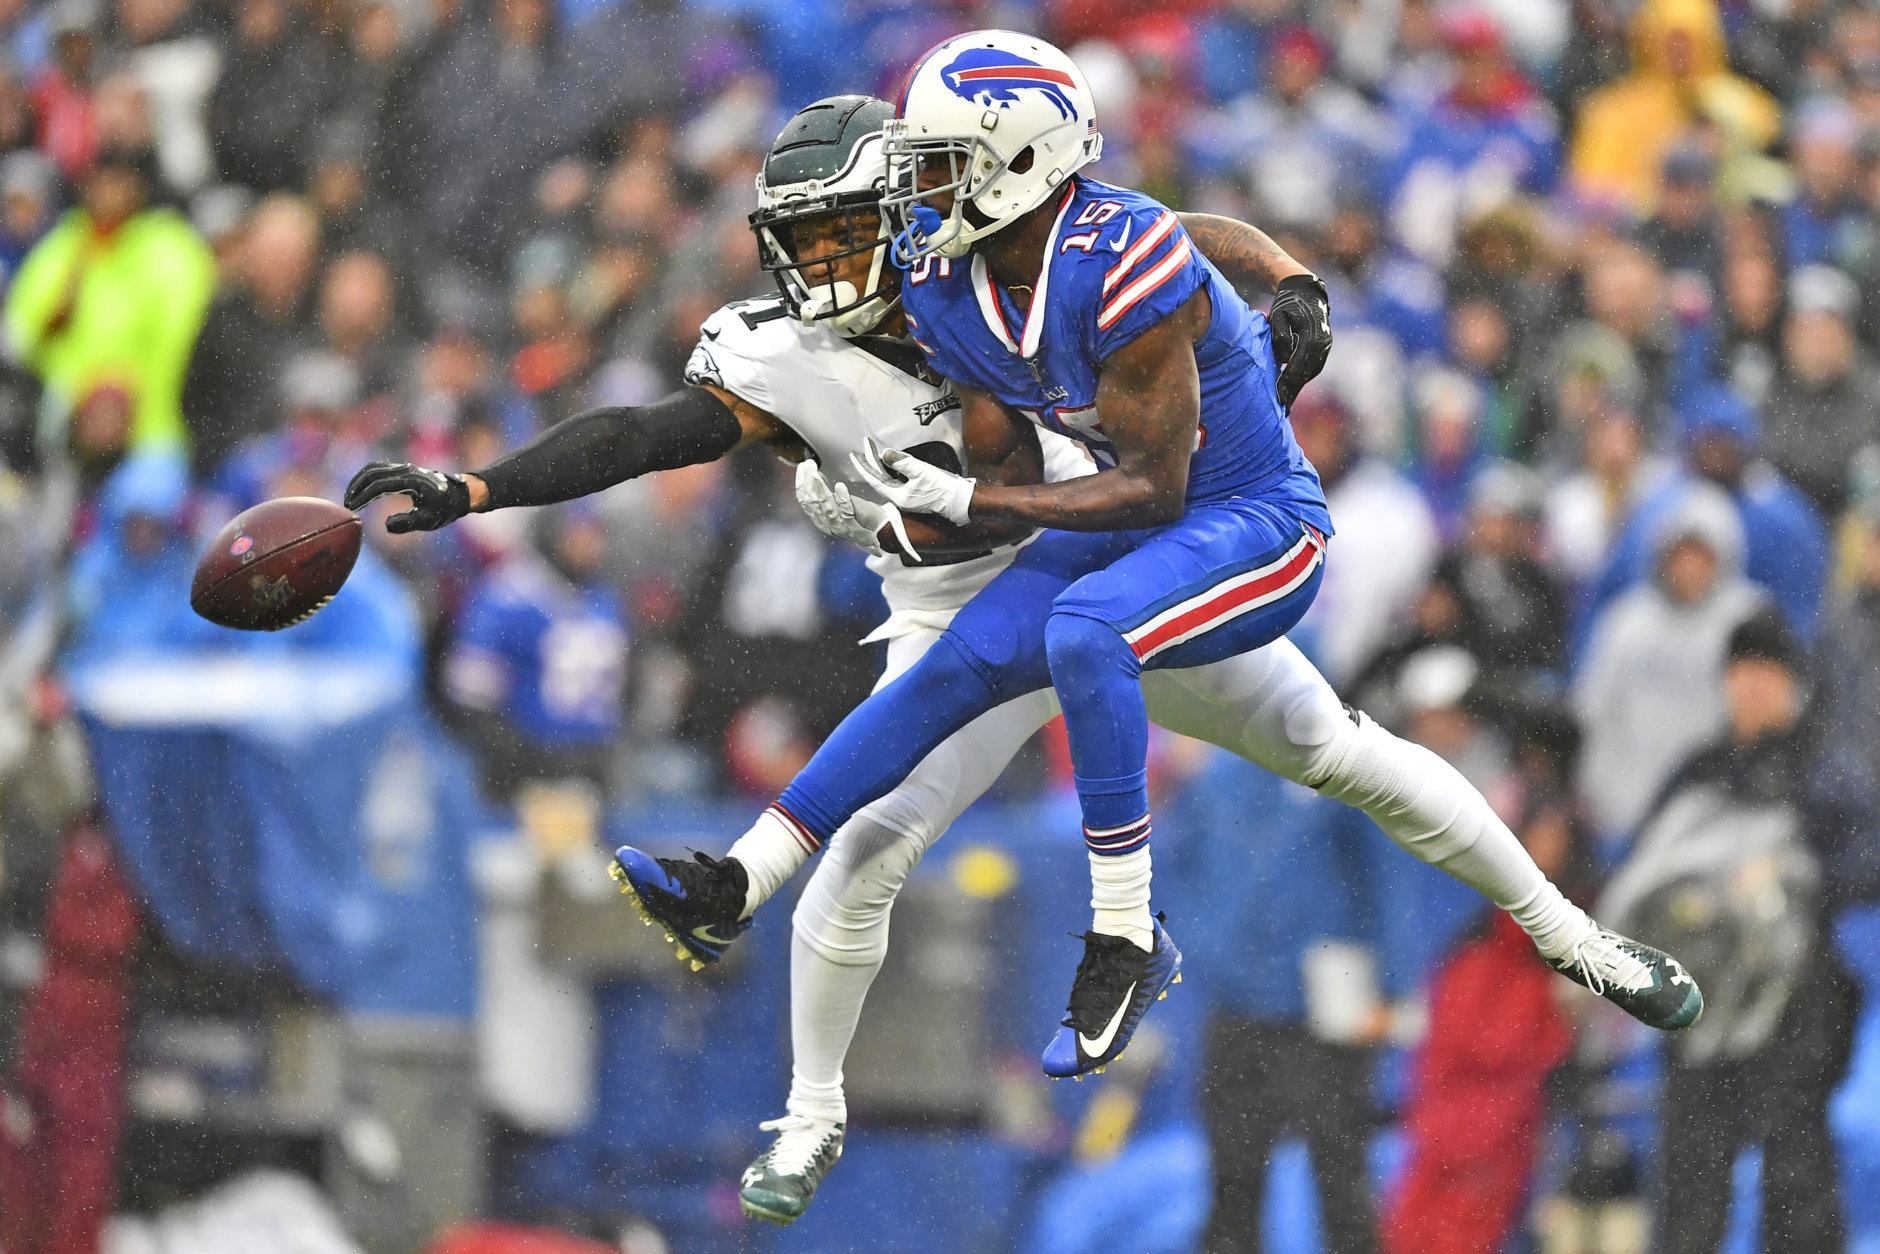 <p><b><i>Eagles 31</i></b><br />
<b><i>Bills 13</i></b></p>
<p>Apparently, Philadelphia took out <a href="https://www.espn.com/nfl/story/_/id/27926556/orlando-scandrick-rips-eagles-gm-being-released" target="_blank" rel="noopener" data-saferedirecturl="https://www.google.com/url?q=https://www.espn.com/nfl/story/_/id/27926556/orlando-scandrick-rips-eagles-gm-being-released&amp;source=gmail&amp;ust=1572303497135000&amp;usg=AFQjCNFKiz3wQjvmbR2e5kwbm0_HWULJXg">the Orlando Scandrick frustration</a> out on Buffalo. Count on the Bills &#8212; whose wins have all come against teams with a losing record at the time they played &#8212; paying it forward to the Redskins.</p>
